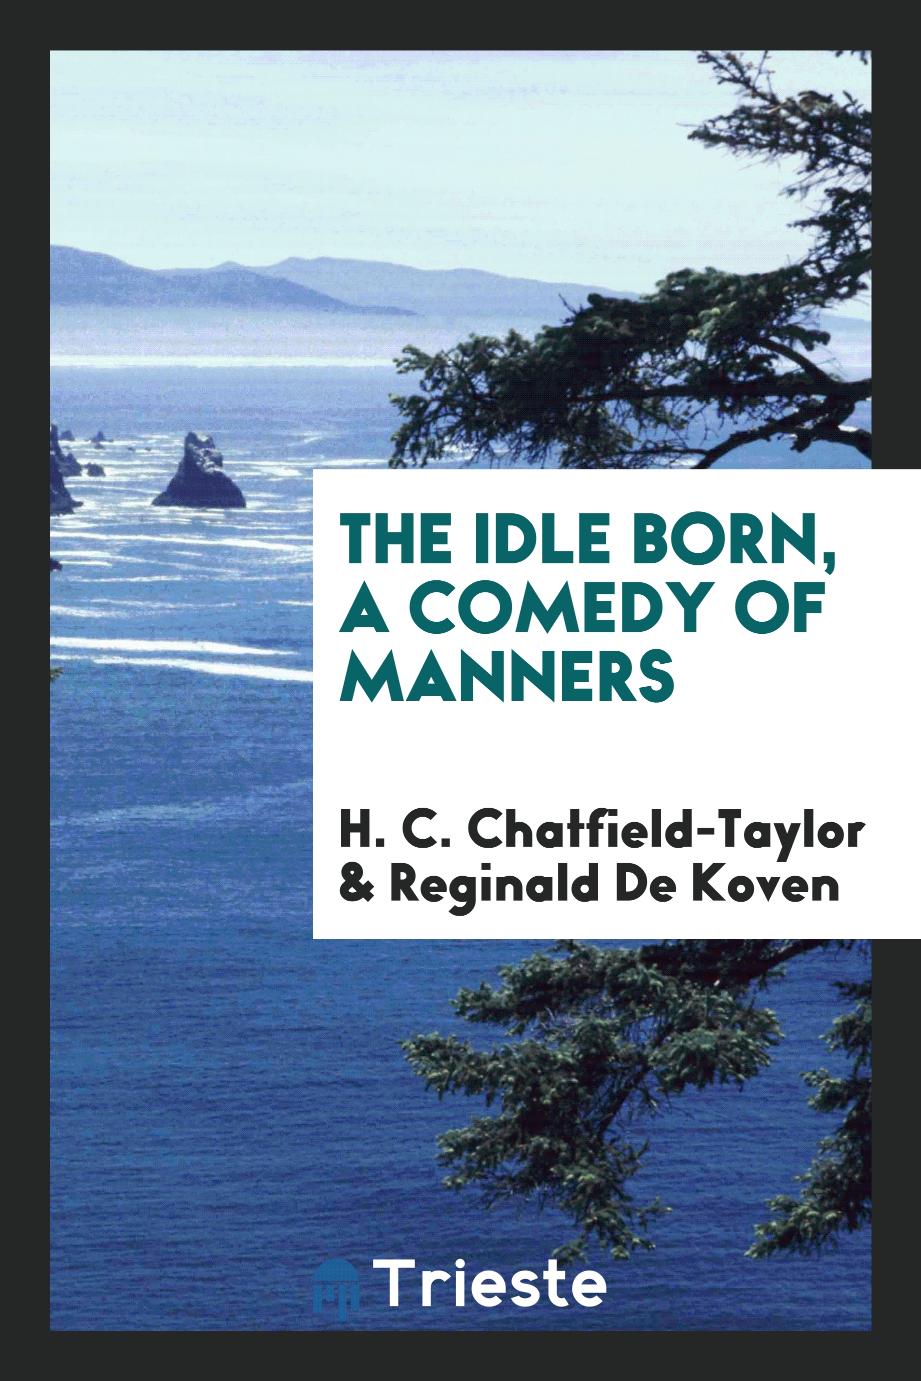 The idle born, a comedy of manners